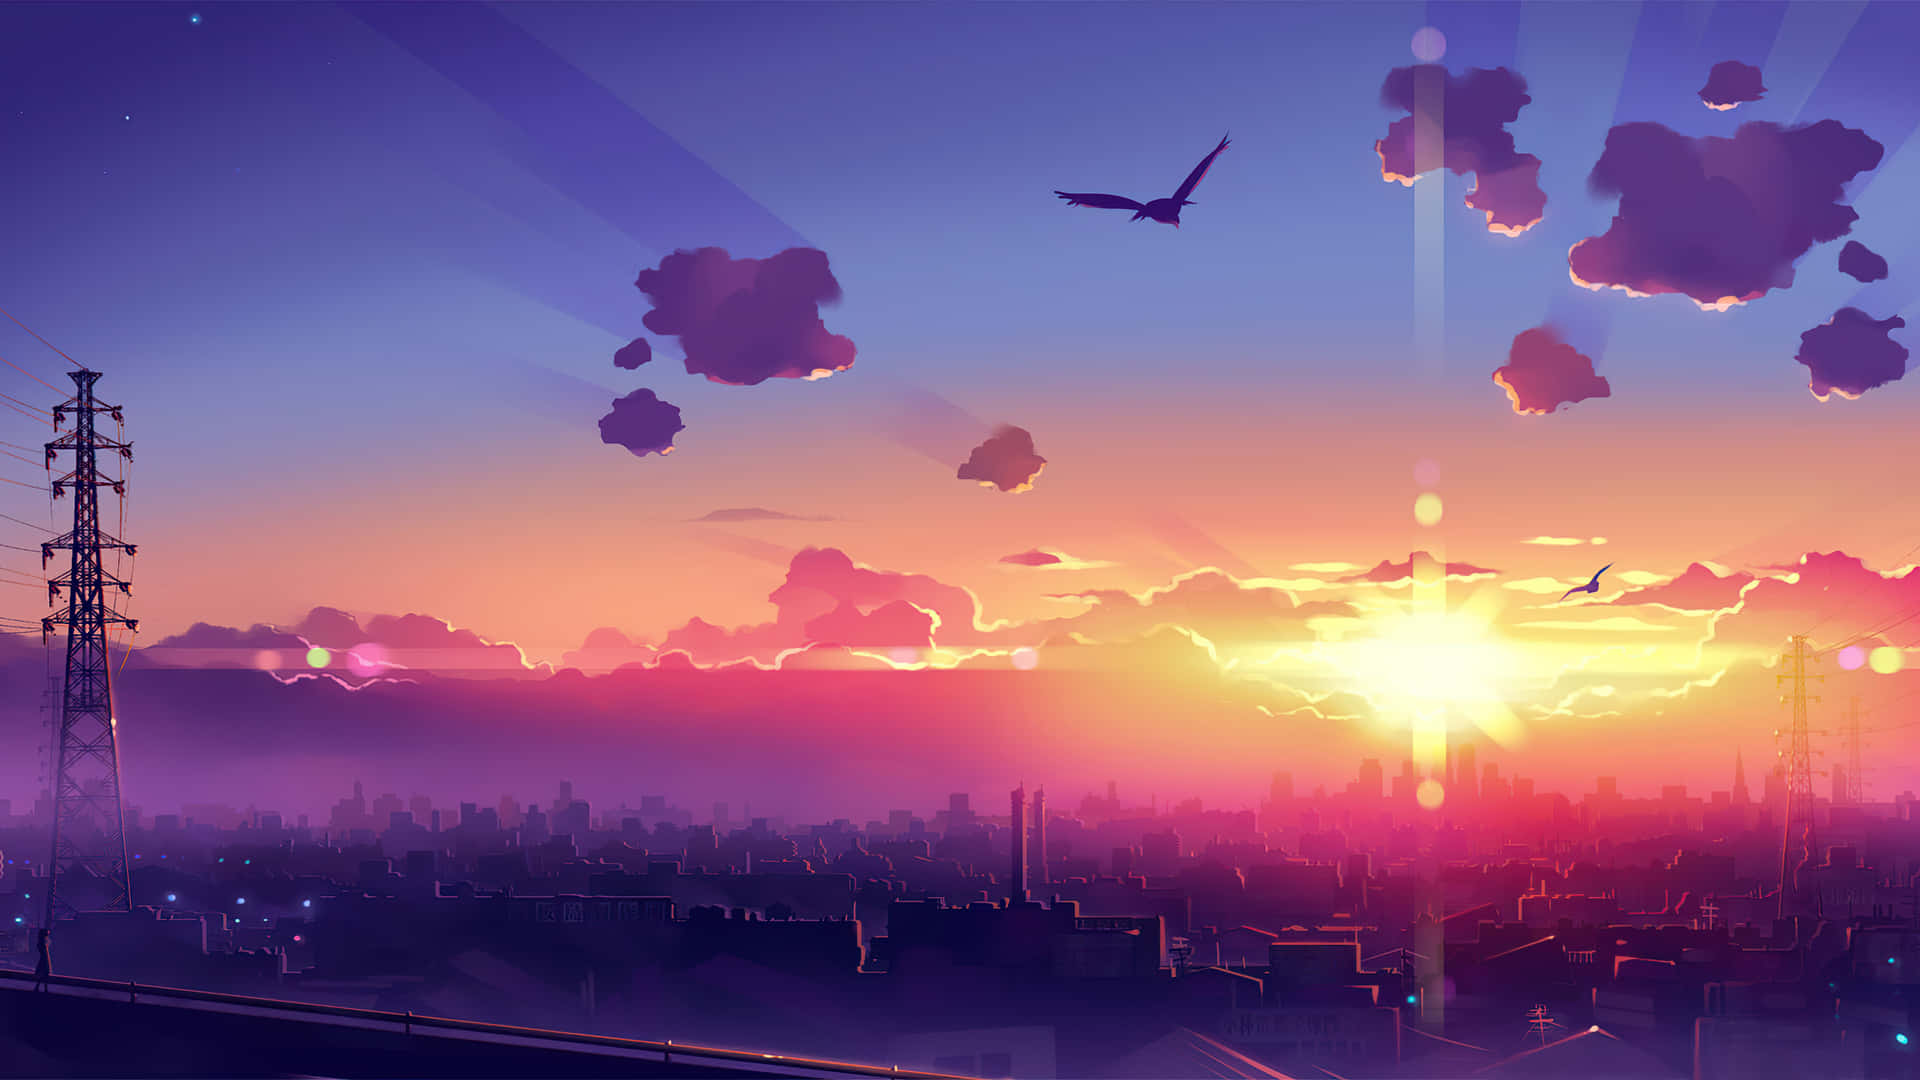 Explore the surreal beauty of the Anime Landscape